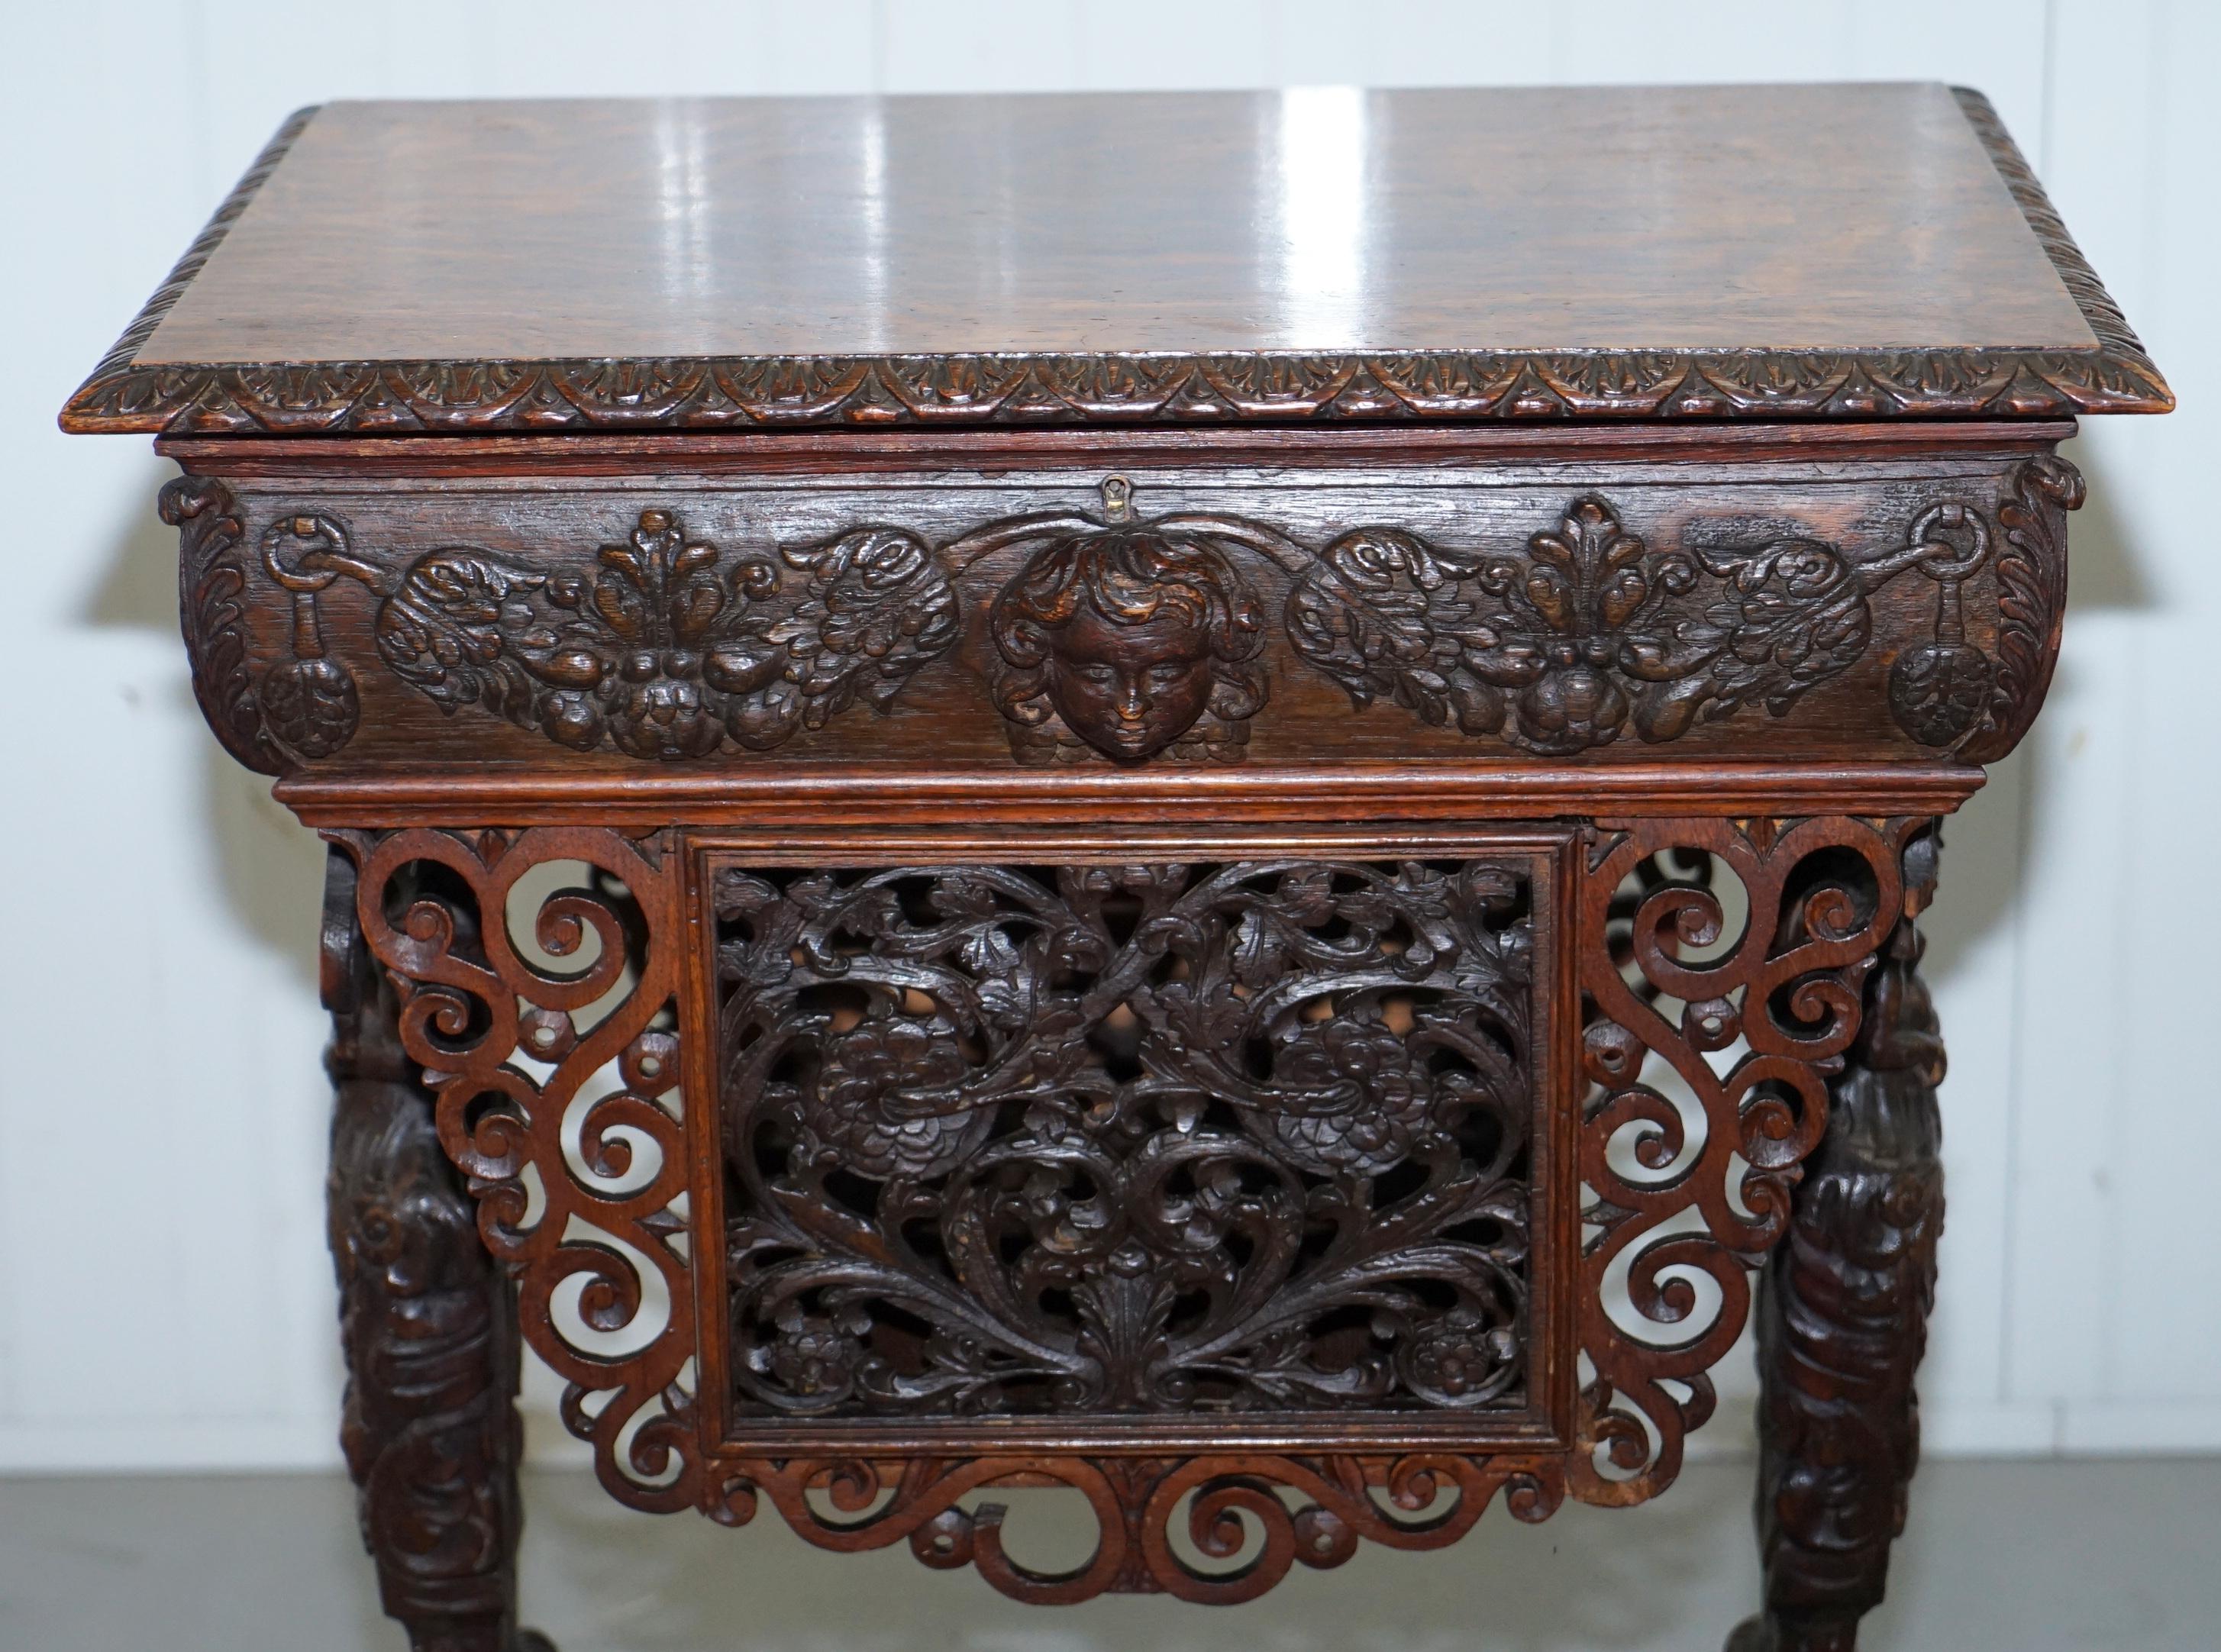 19th Century Rare Hand Carved Solid Oak Victorian Sewing Table with Putti Angels 17th Century